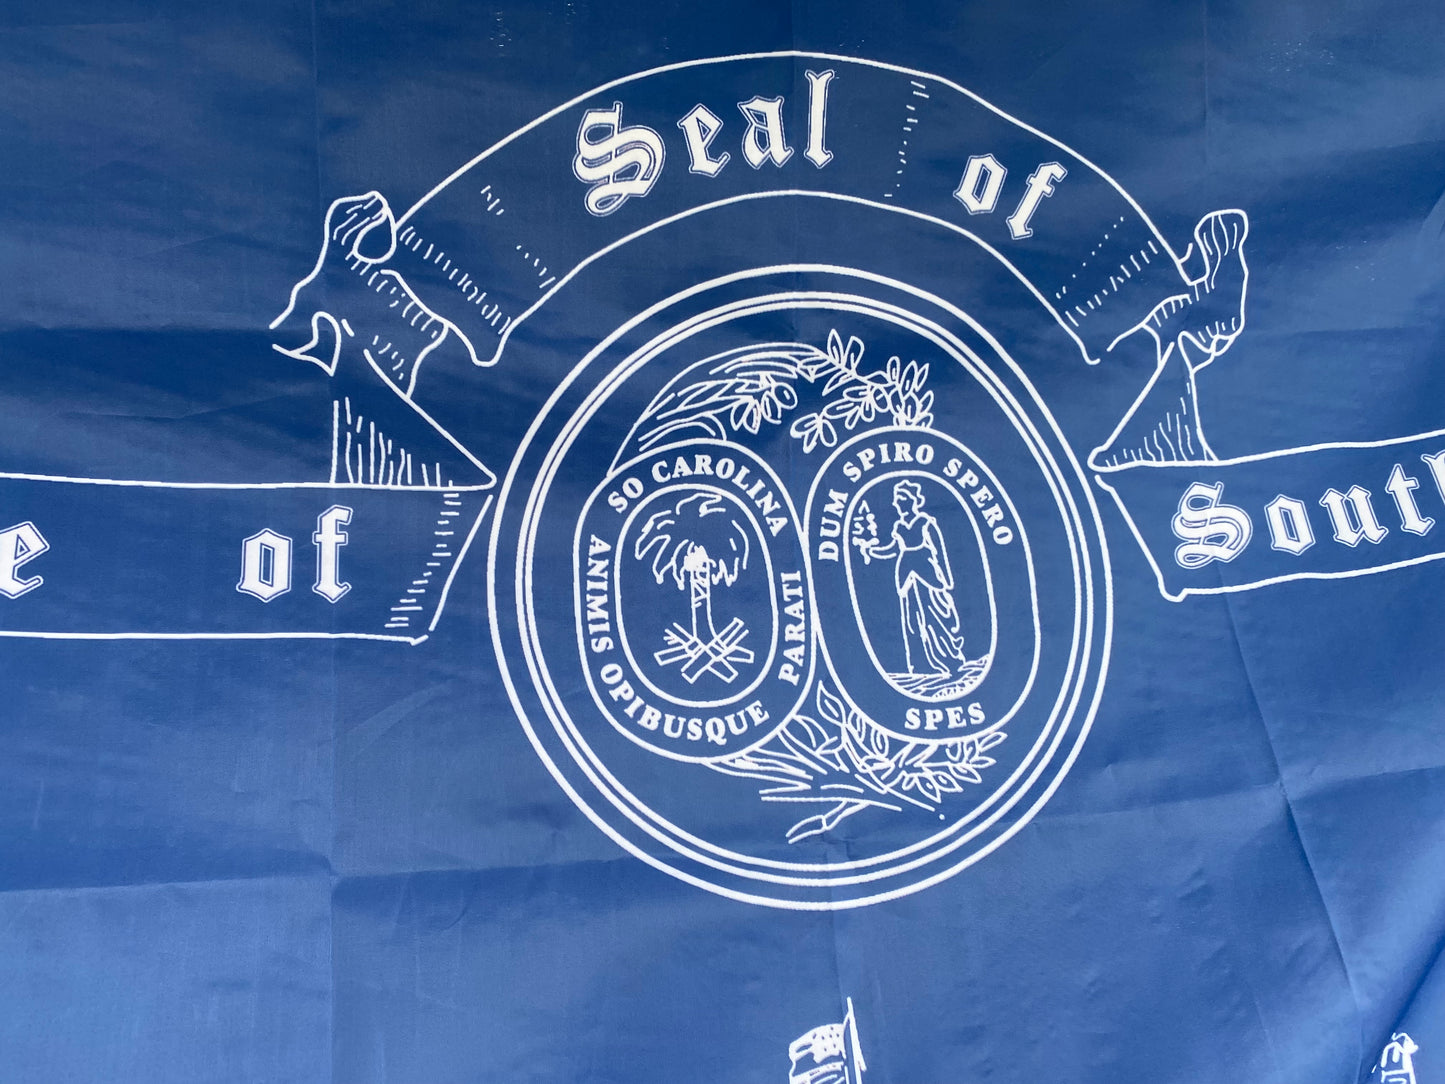 South Carolina State Seal and Fort Sumter House Flag